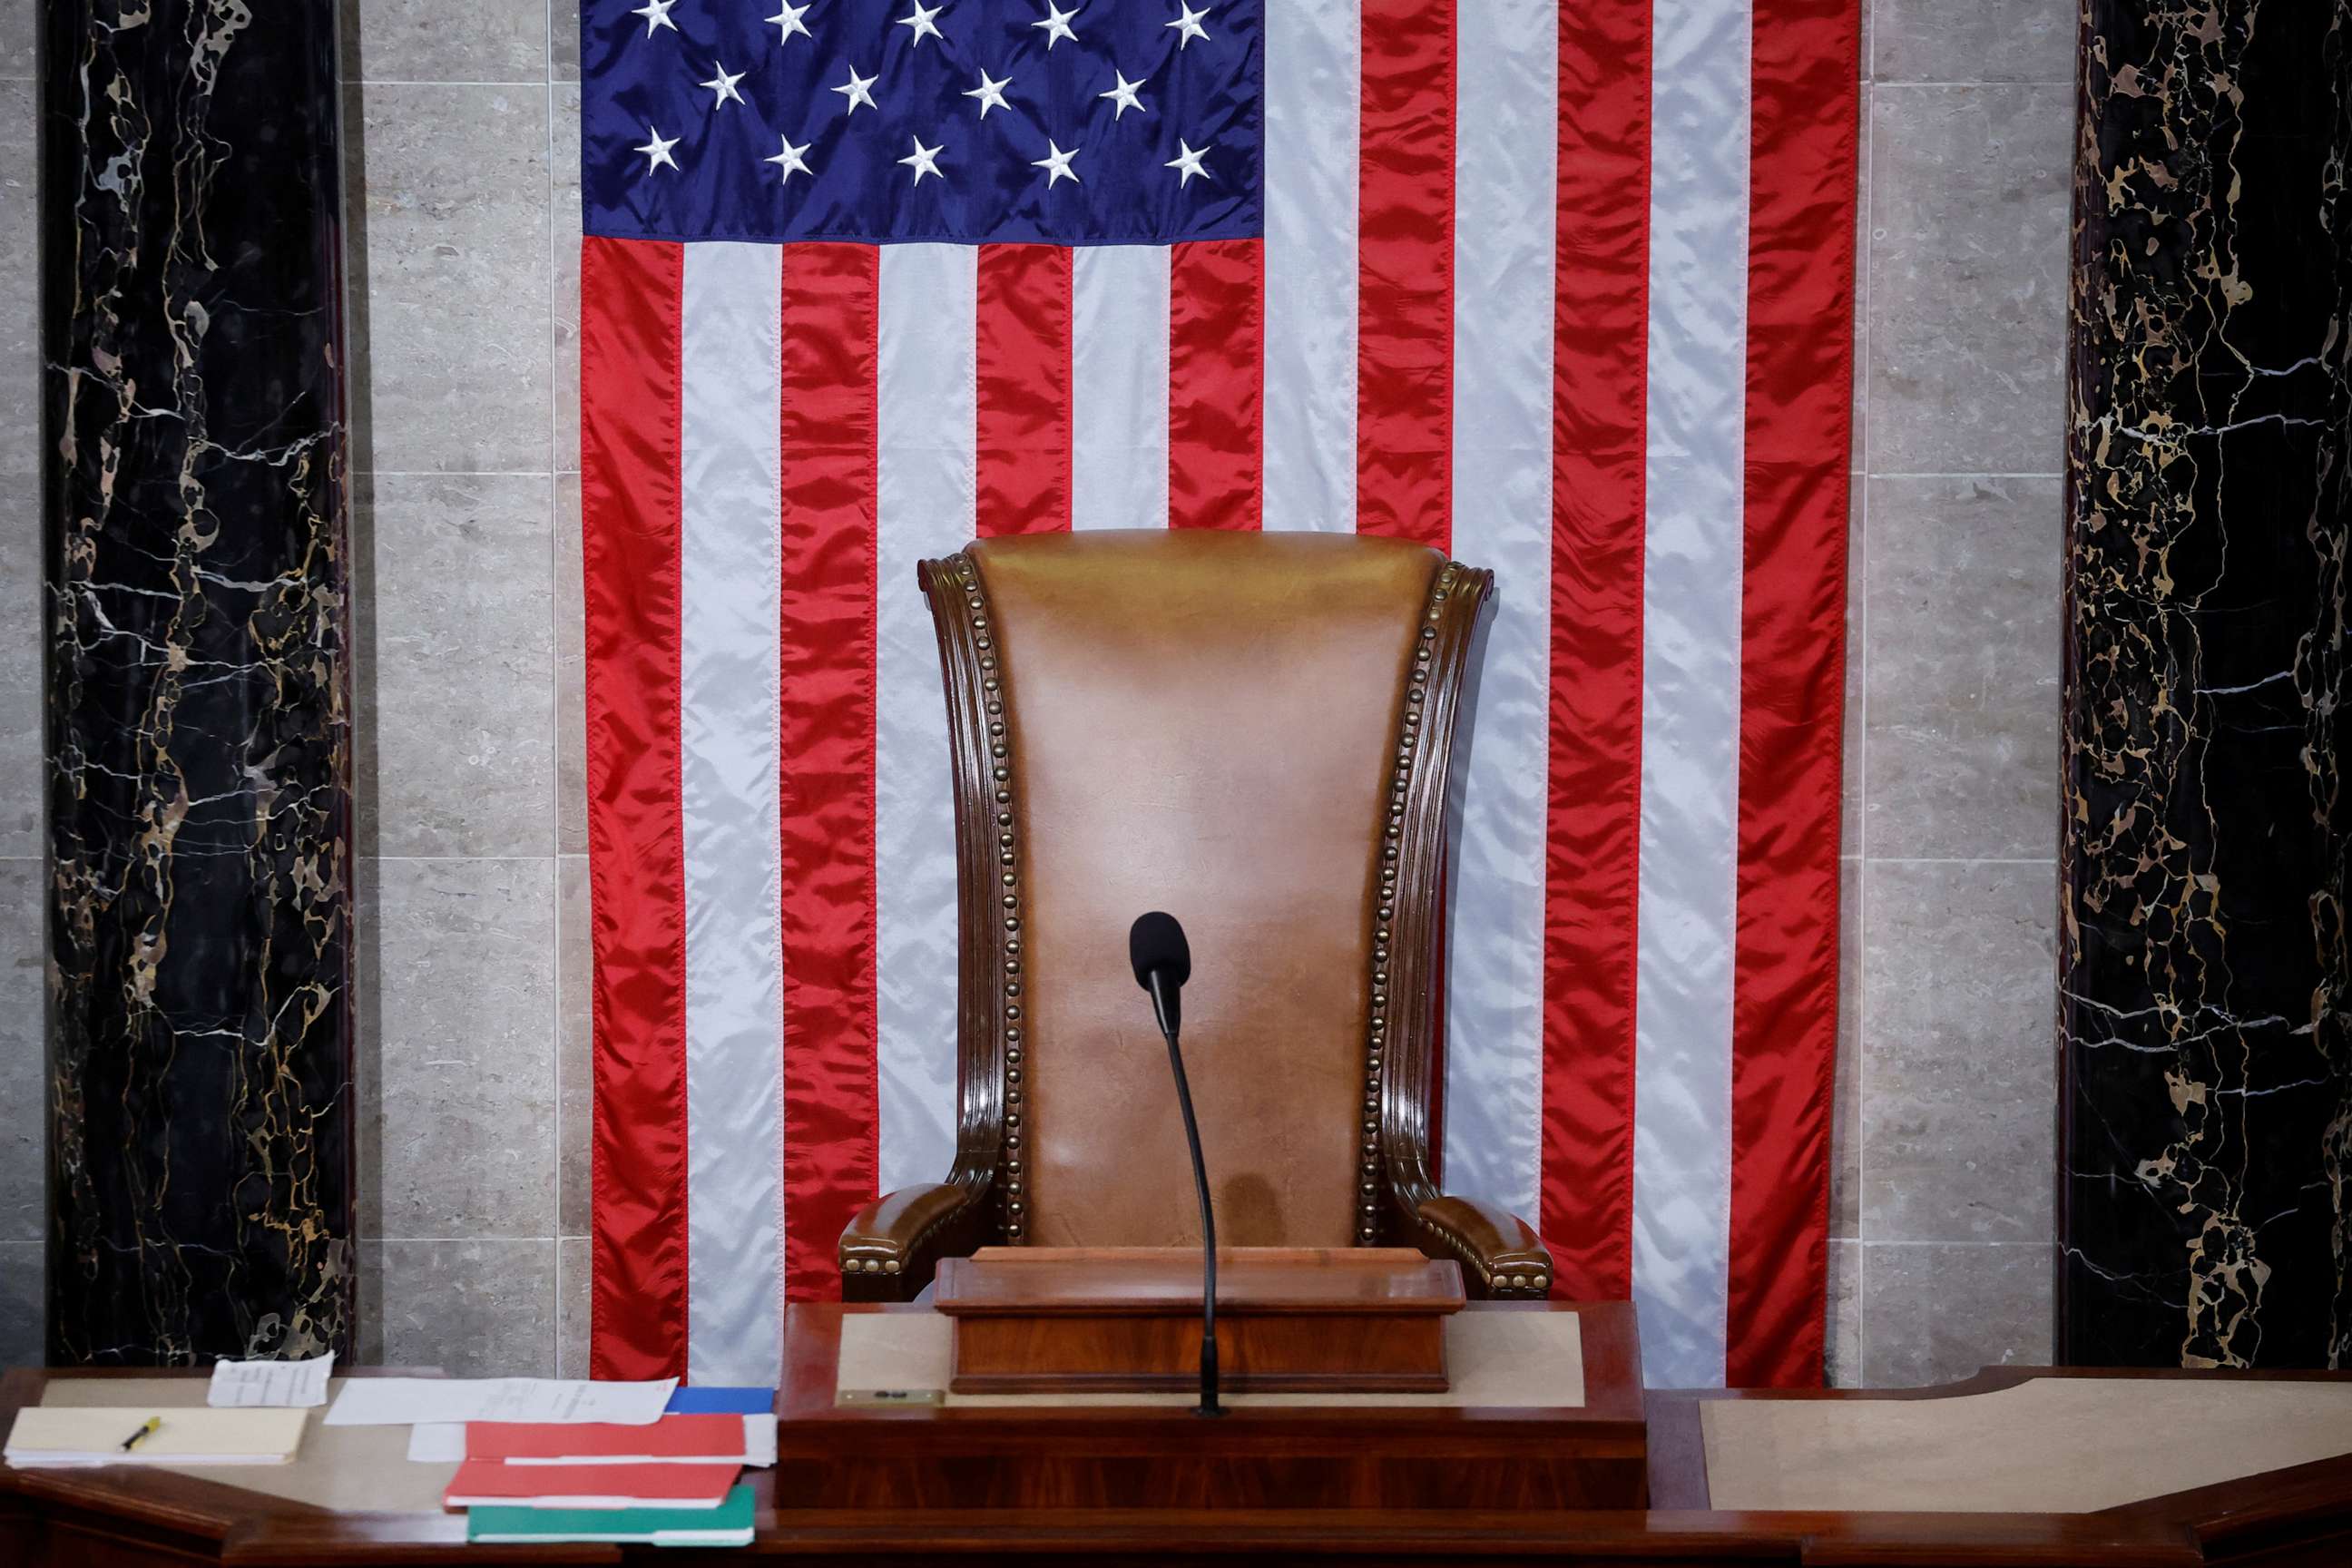 PHOTO: The chair of the Speaker of the House sits empty for a third straight day as members of the House gather for another expected round of voting for a new Speaker on the third day of the 118th Congress at the U.S. Capitol in Washington, Jan. 5, 2023.